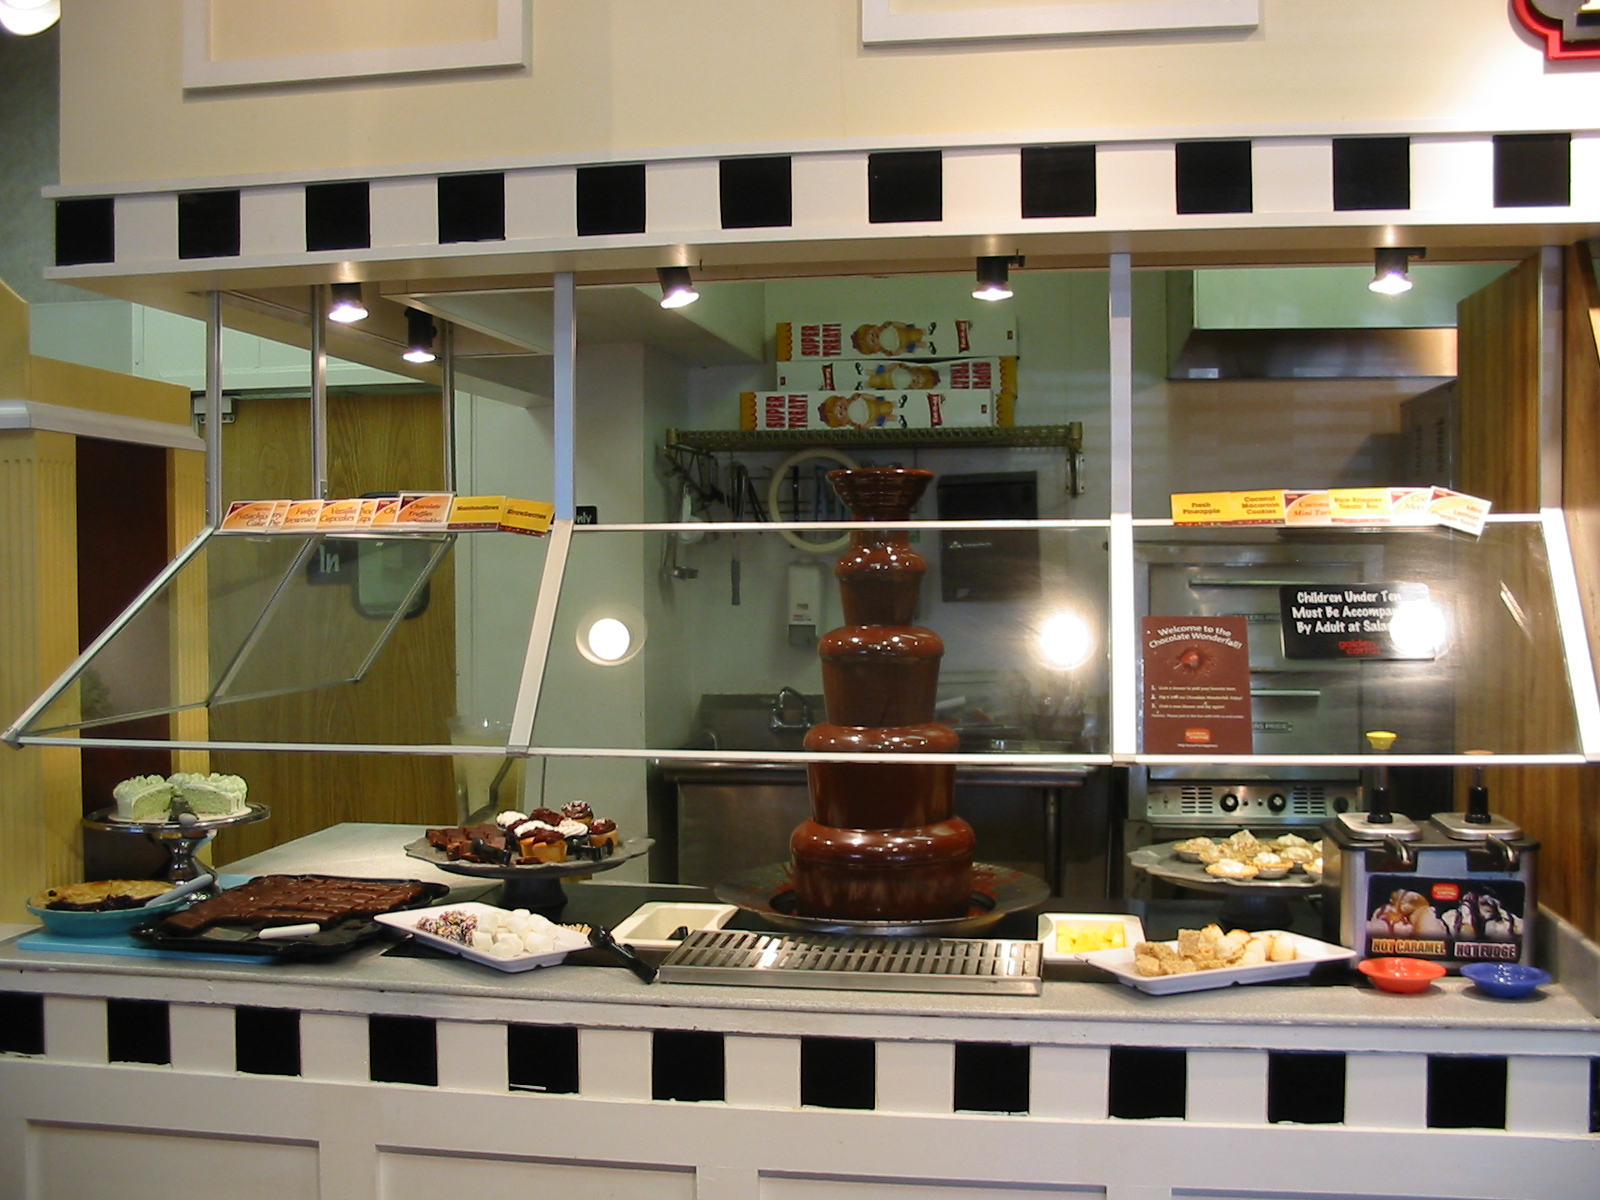 Chocolate Fountain at Golden Corral